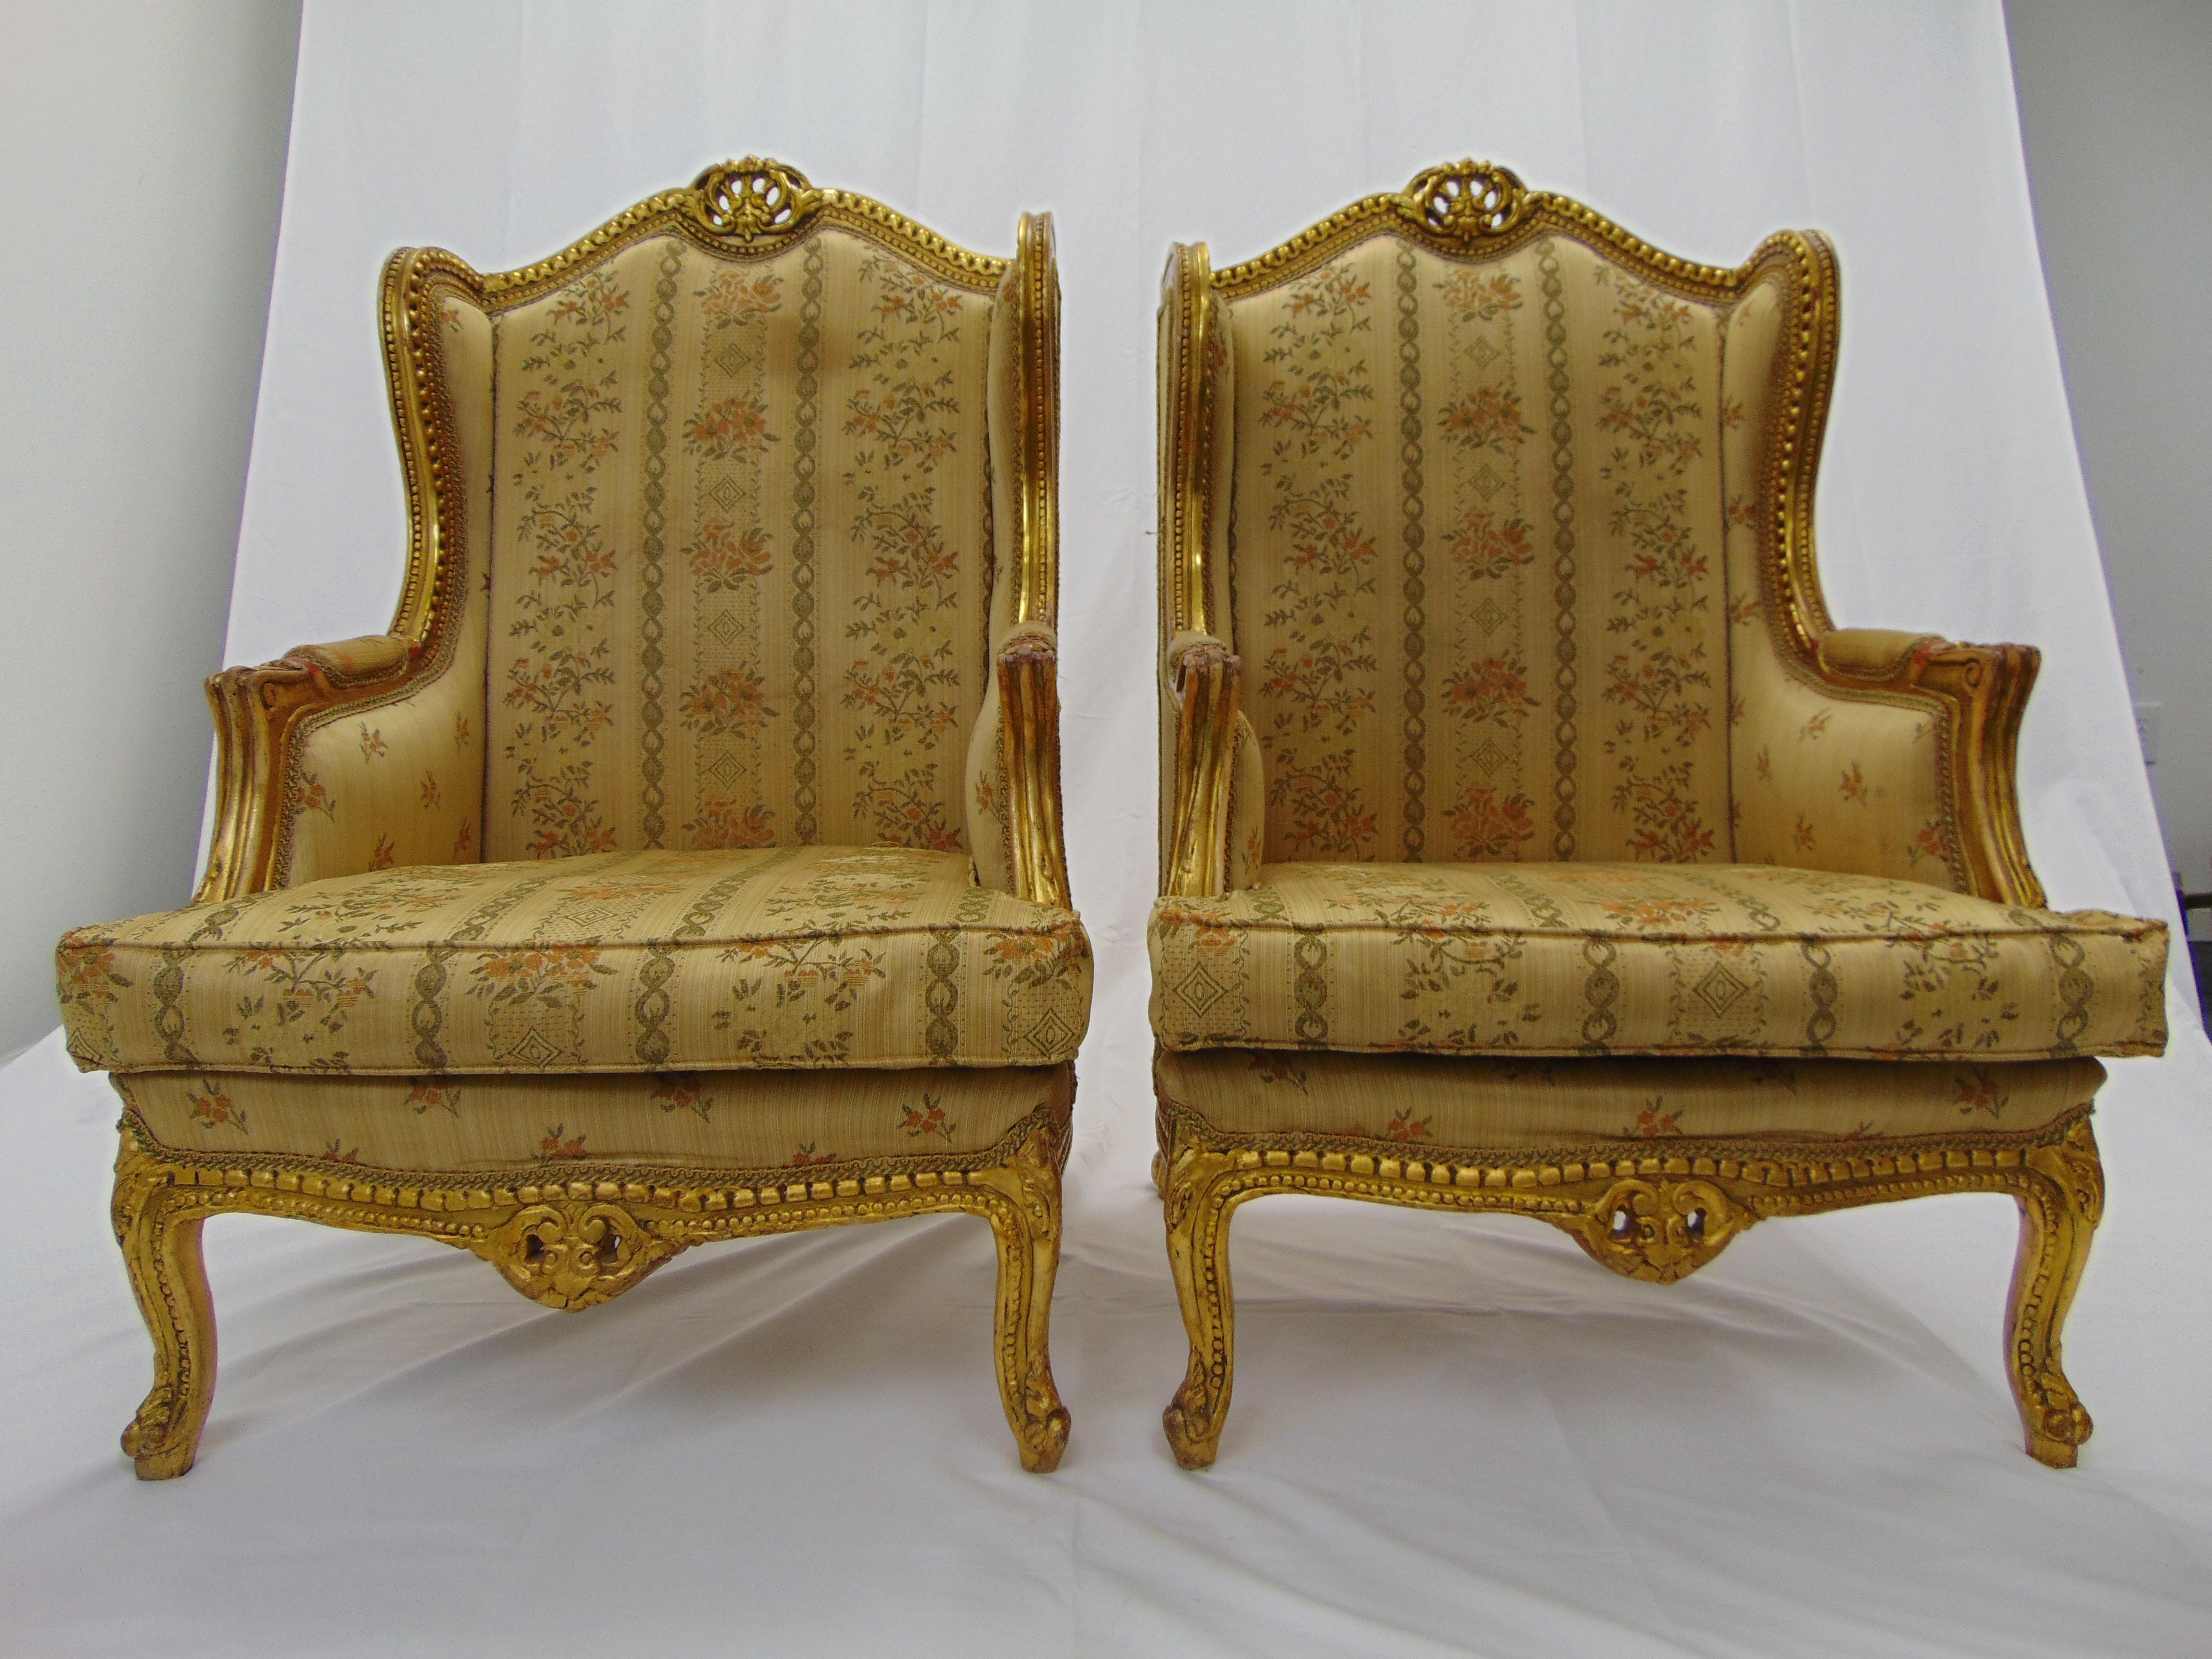 This is a beautiful, opulent pair of vintage wingback gold gilt chairs. These are hand carved and very heavy. They would look absolutely fabulous in a new fabric of your choosing. The measurements are: 28.5'' W x 32''D x 47'' H 26'' armrest height